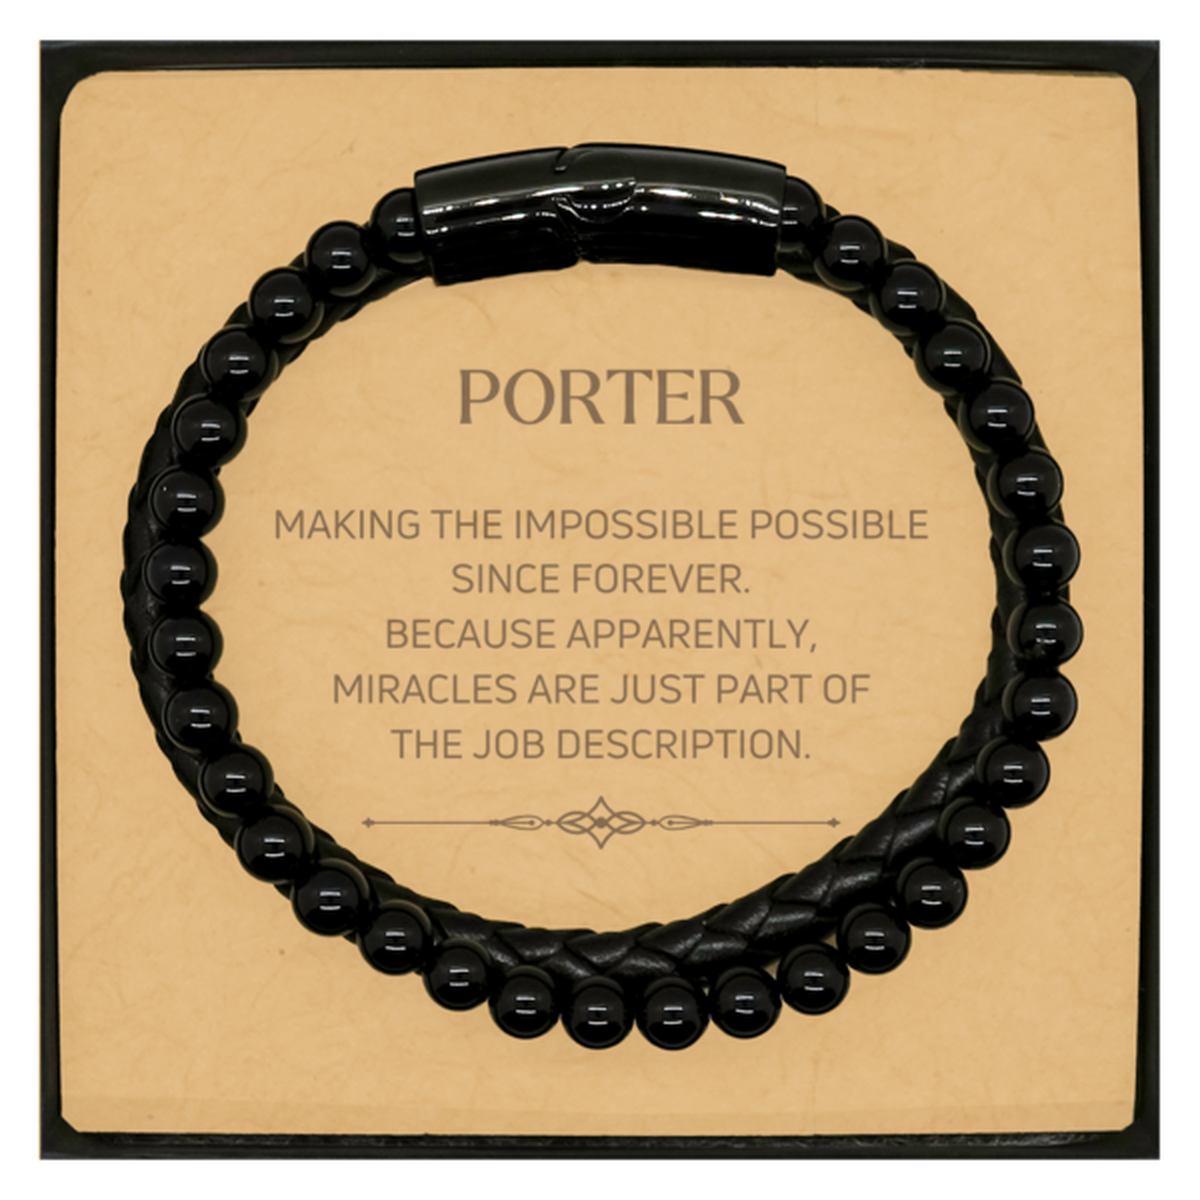 Funny Porter Gifts, Miracles are just part of the job description, Inspirational Birthday Christmas Stone Leather Bracelets For Porter, Men, Women, Coworkers, Friends, Boss